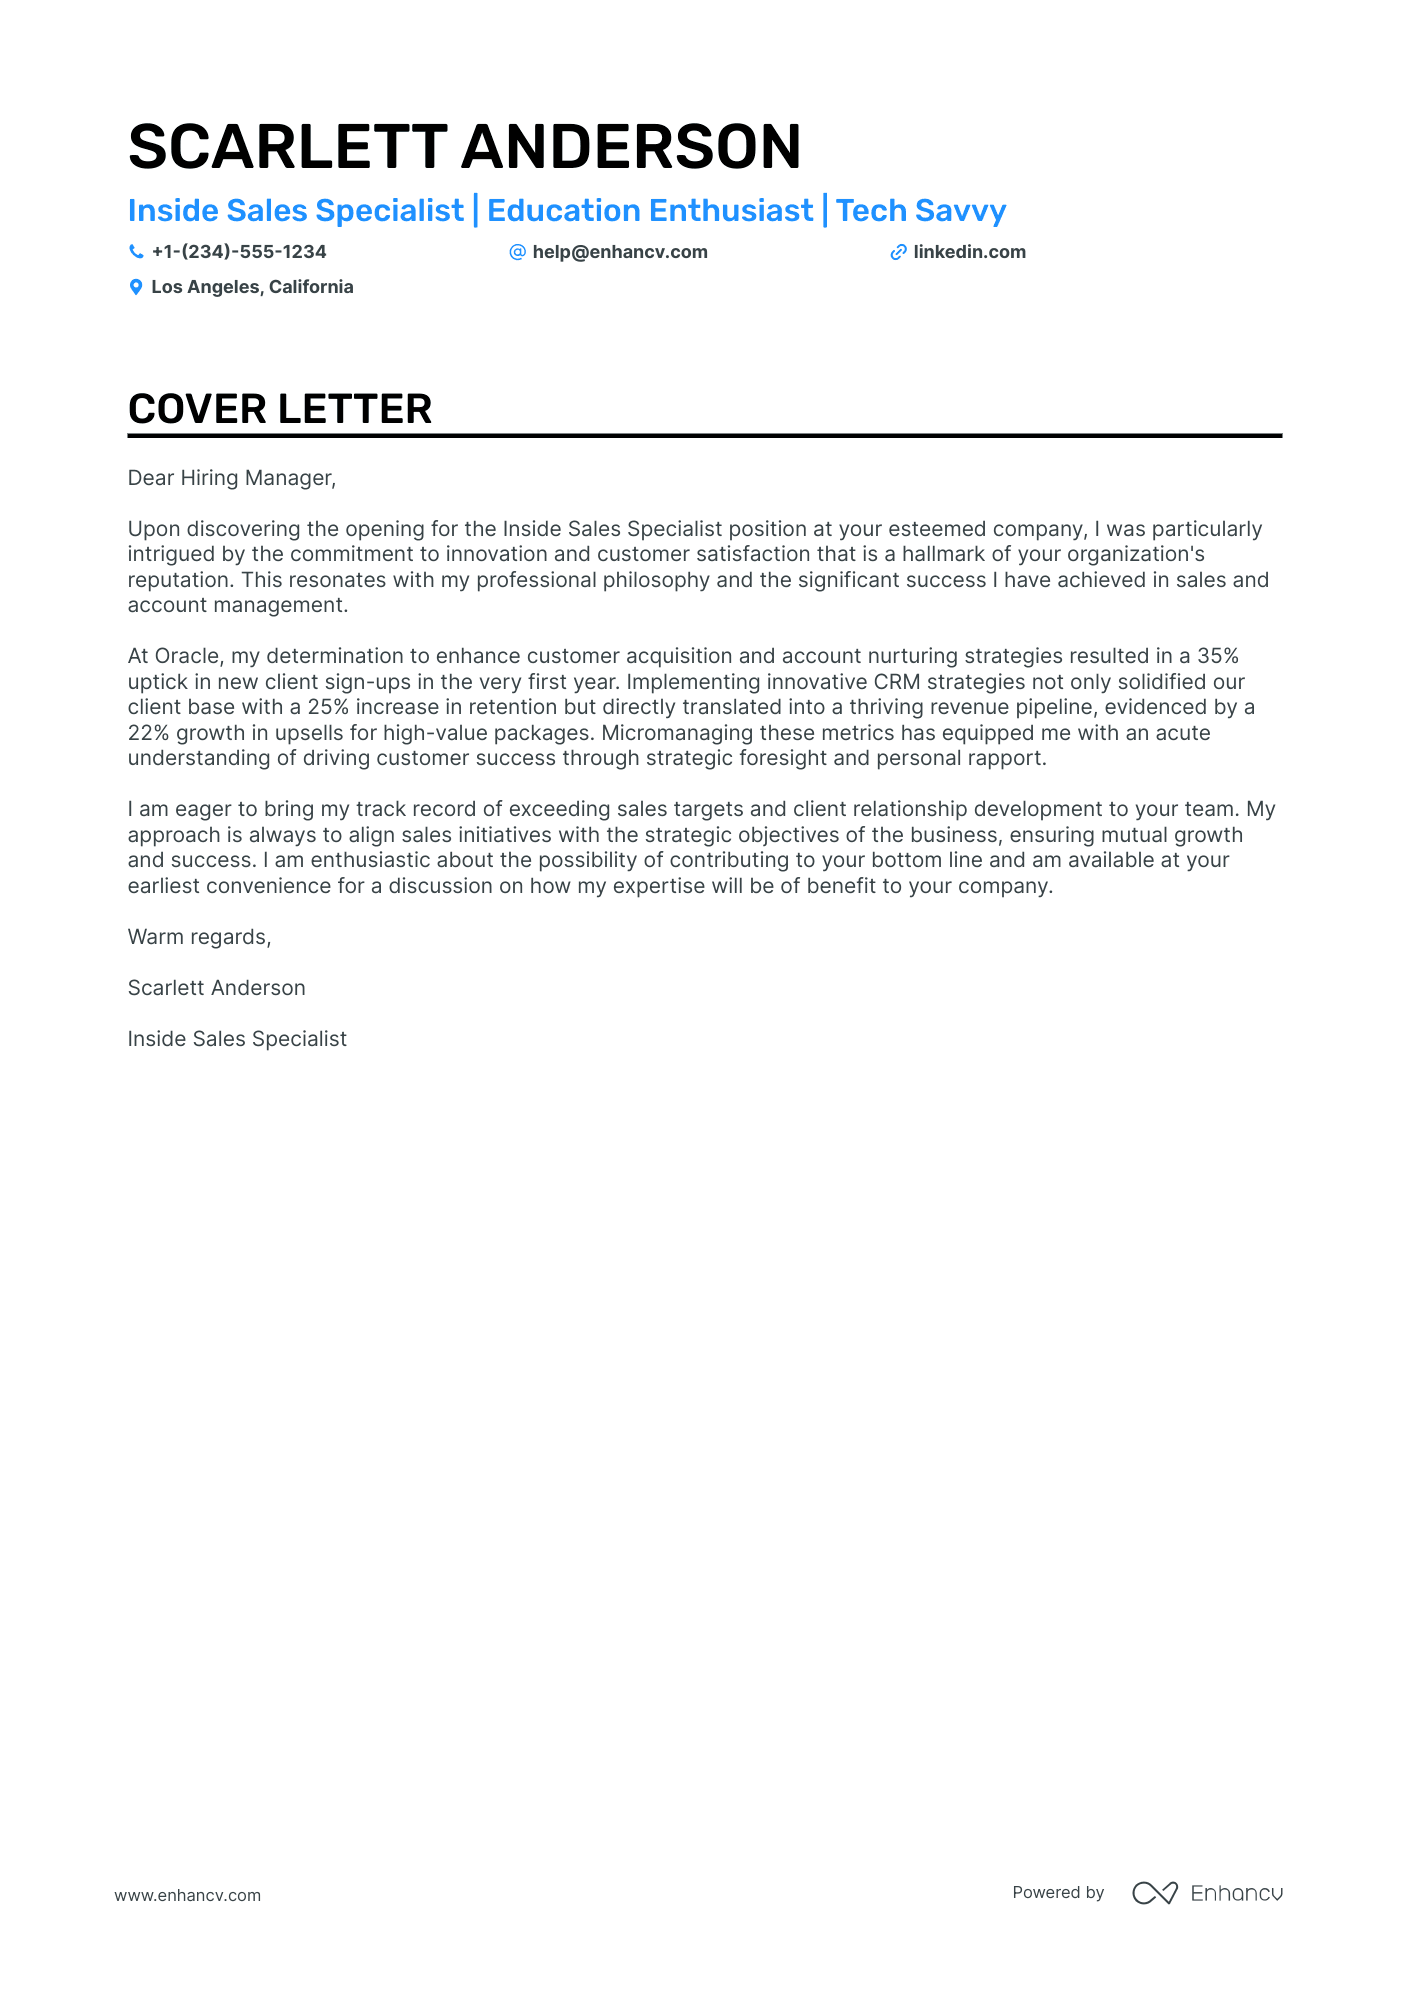 Sales Specialist cover letter